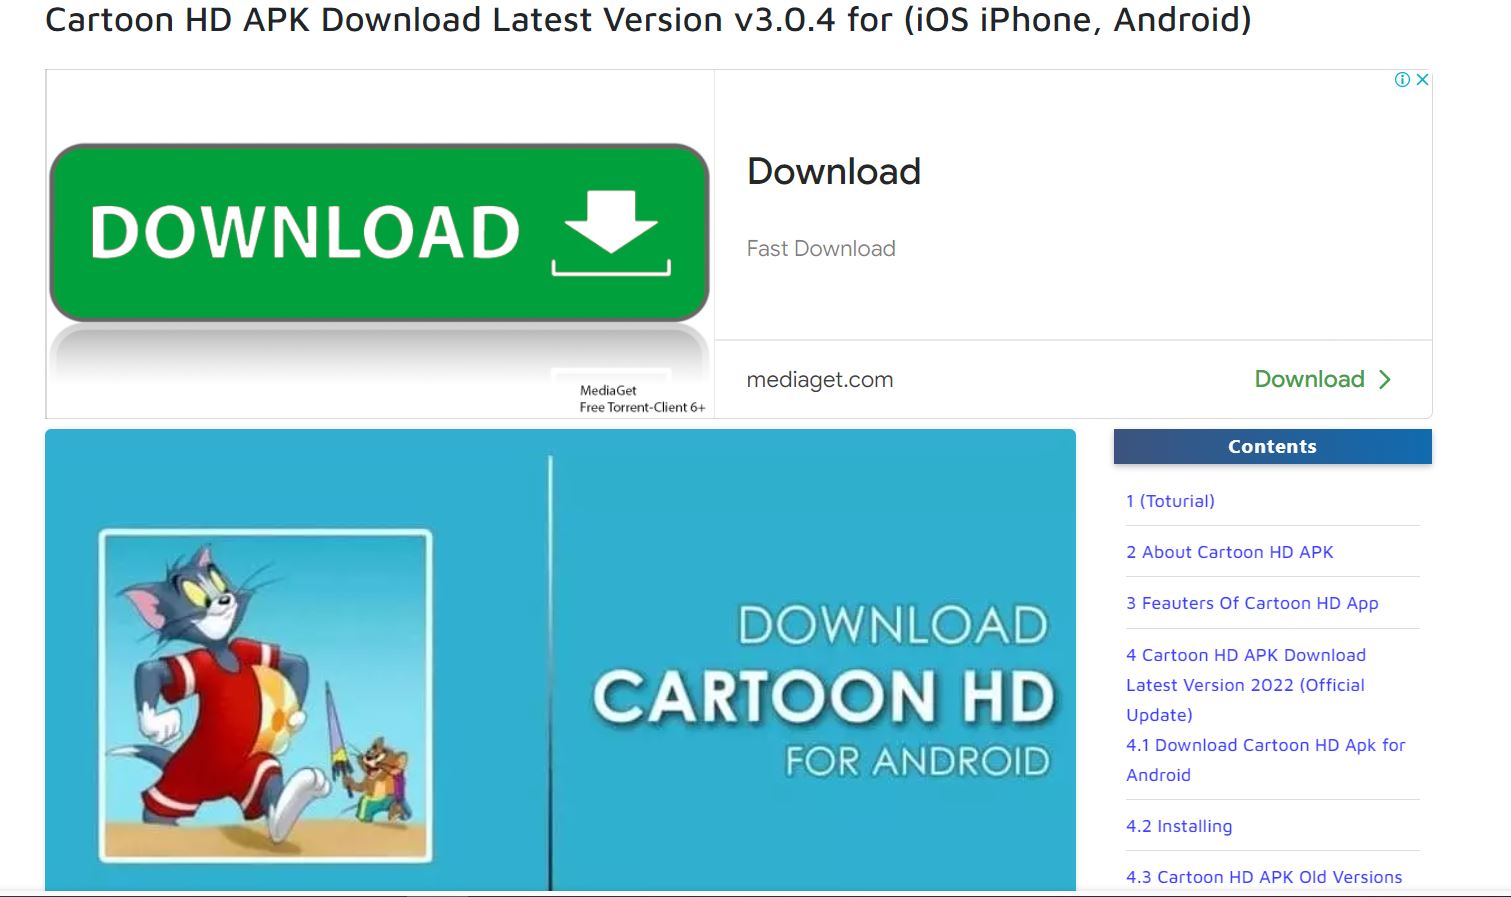 Cartoon HD Apk Download-Latest Version On Android And IOS Devices